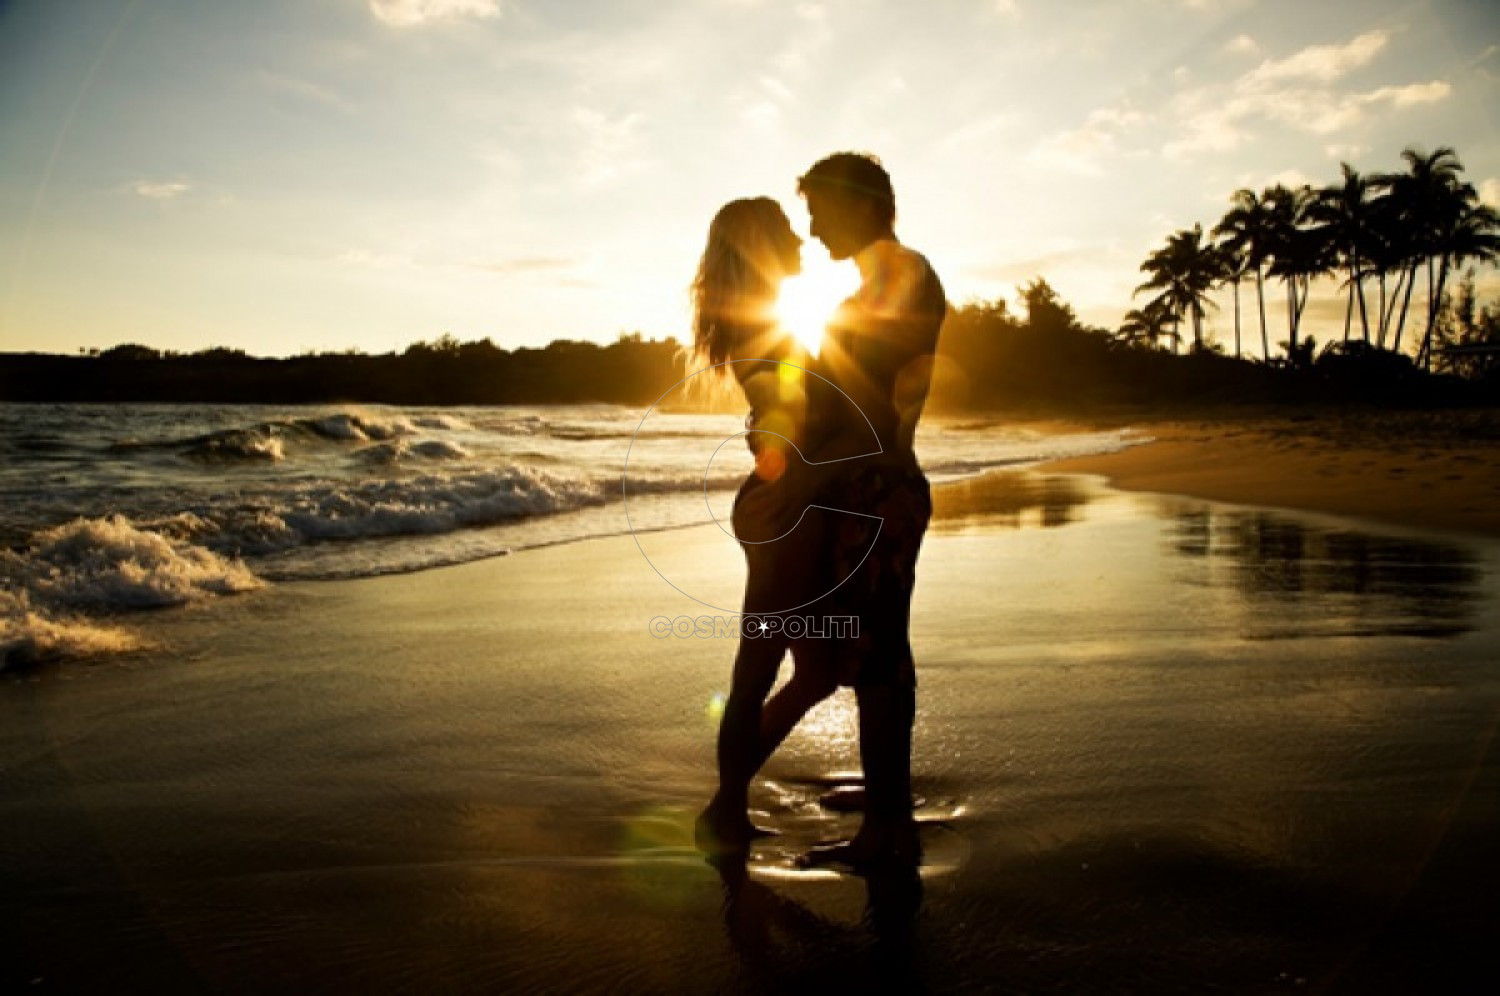 love-couple-beach-kiss-kissing-hot-couple-in-sun-shine-love-images-download-romantic-love-images-download-lonelyness-alone-www.143loveu.blogspot.in_